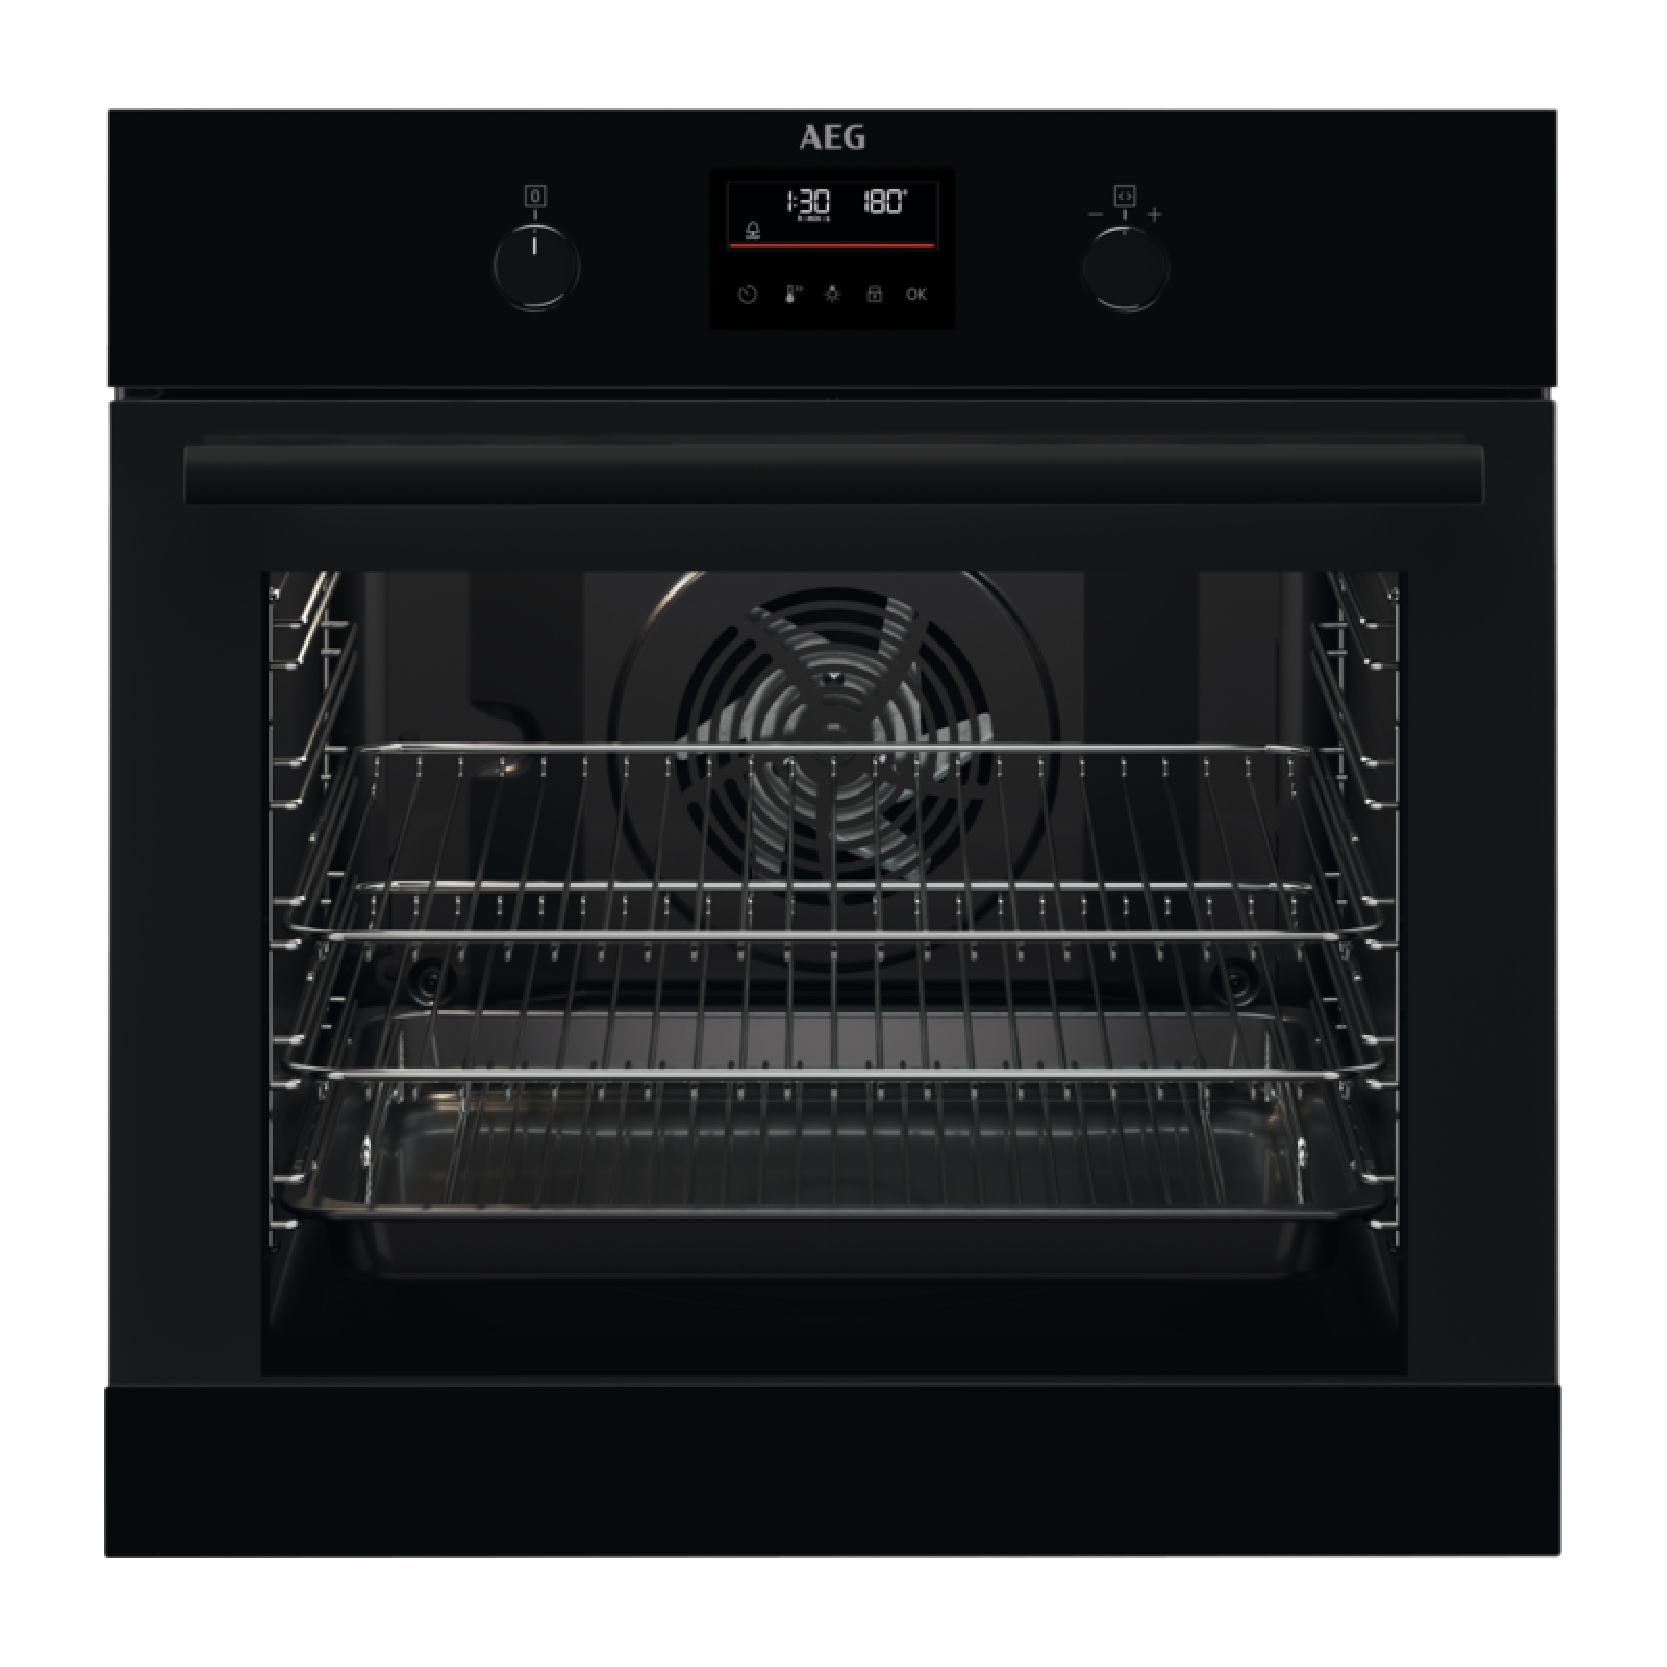 MULTIFUNCTION OVEN SENSECOOK PYROLYTIC SELF-CLEANING AND STEAMBAKE AND ROTARY CONTROLS / TOUCH CONTROLS AEG | BPK355061B